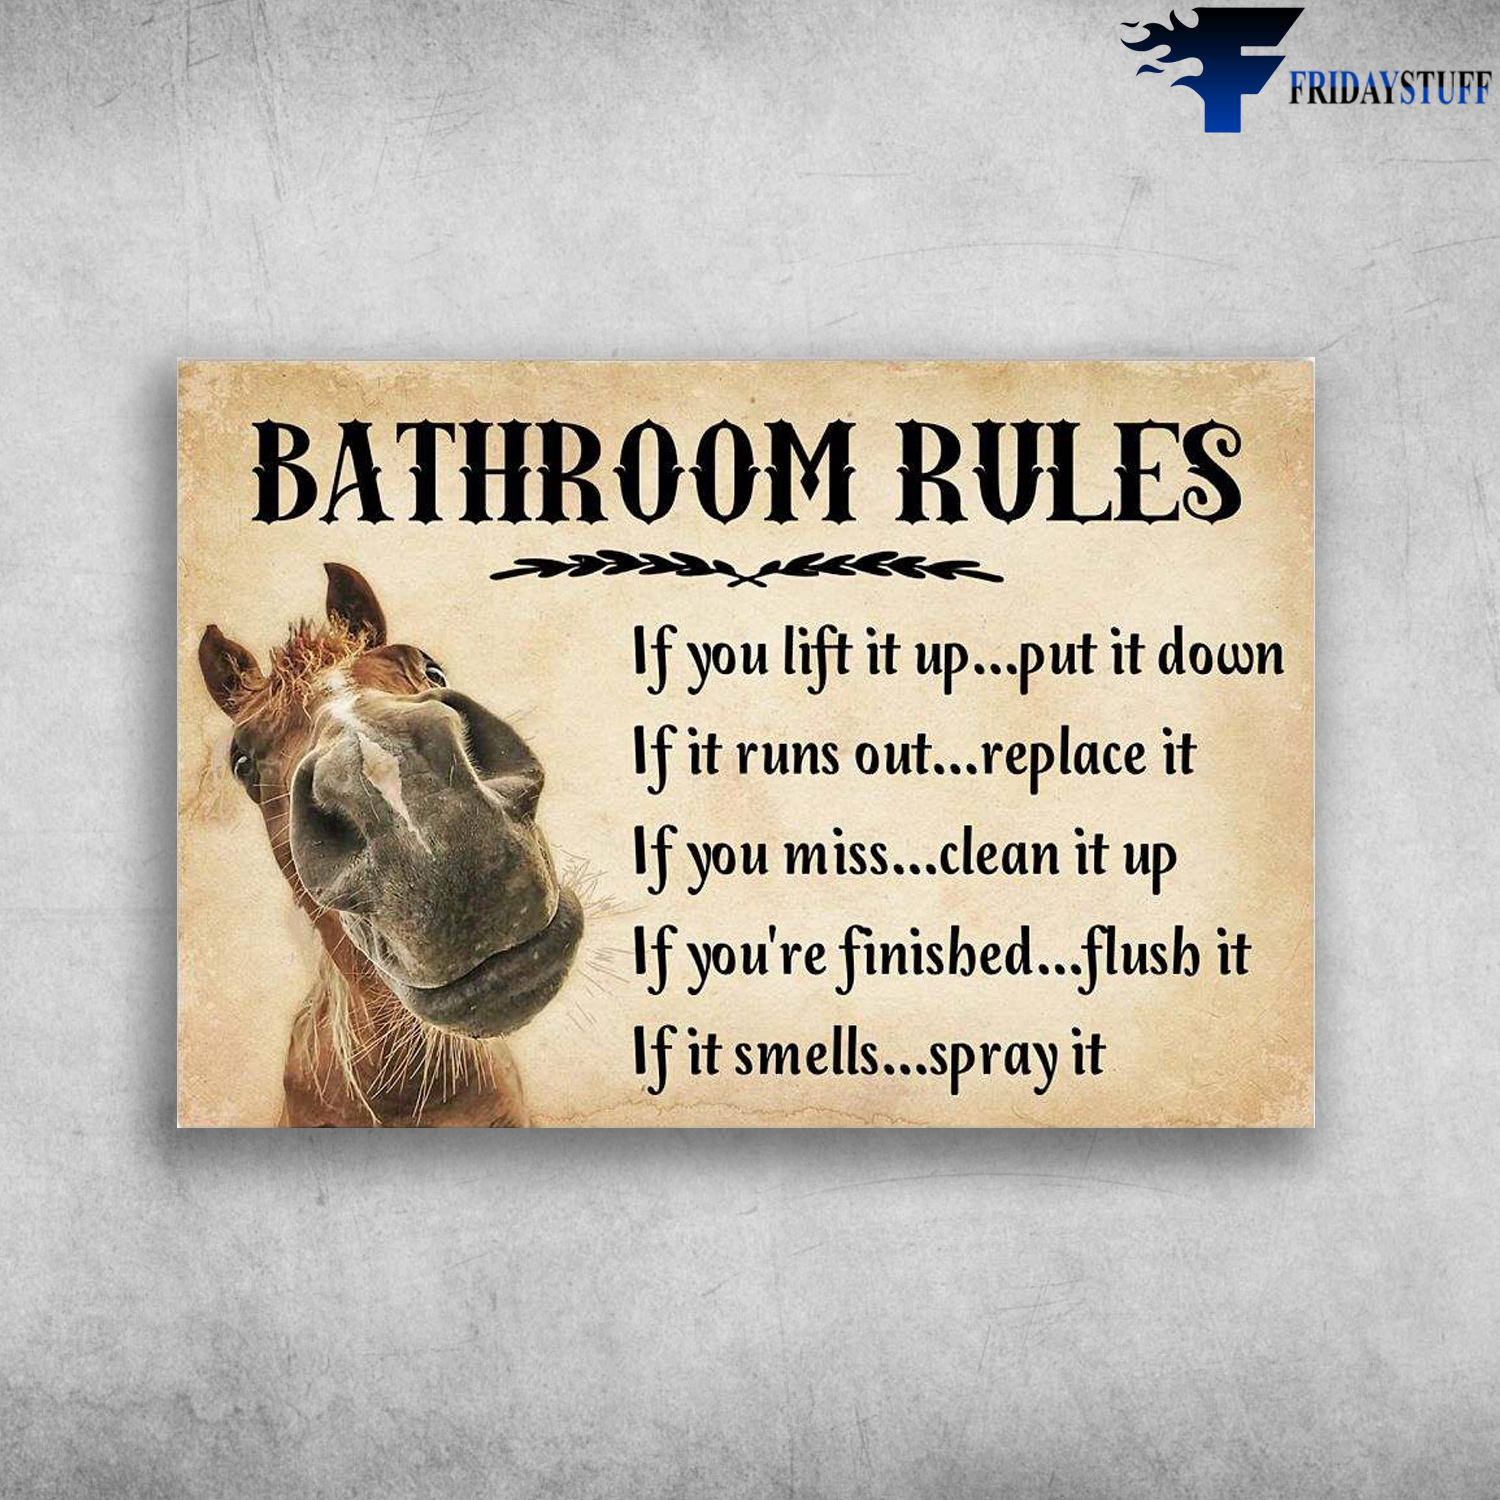 Bathroom Rules - If You Lift It Up, Put It Down, If Ir Runs Out, Replace It, If You Miss, Clean It Up, If You're Finished, Flush It, If It Smells, Spray It